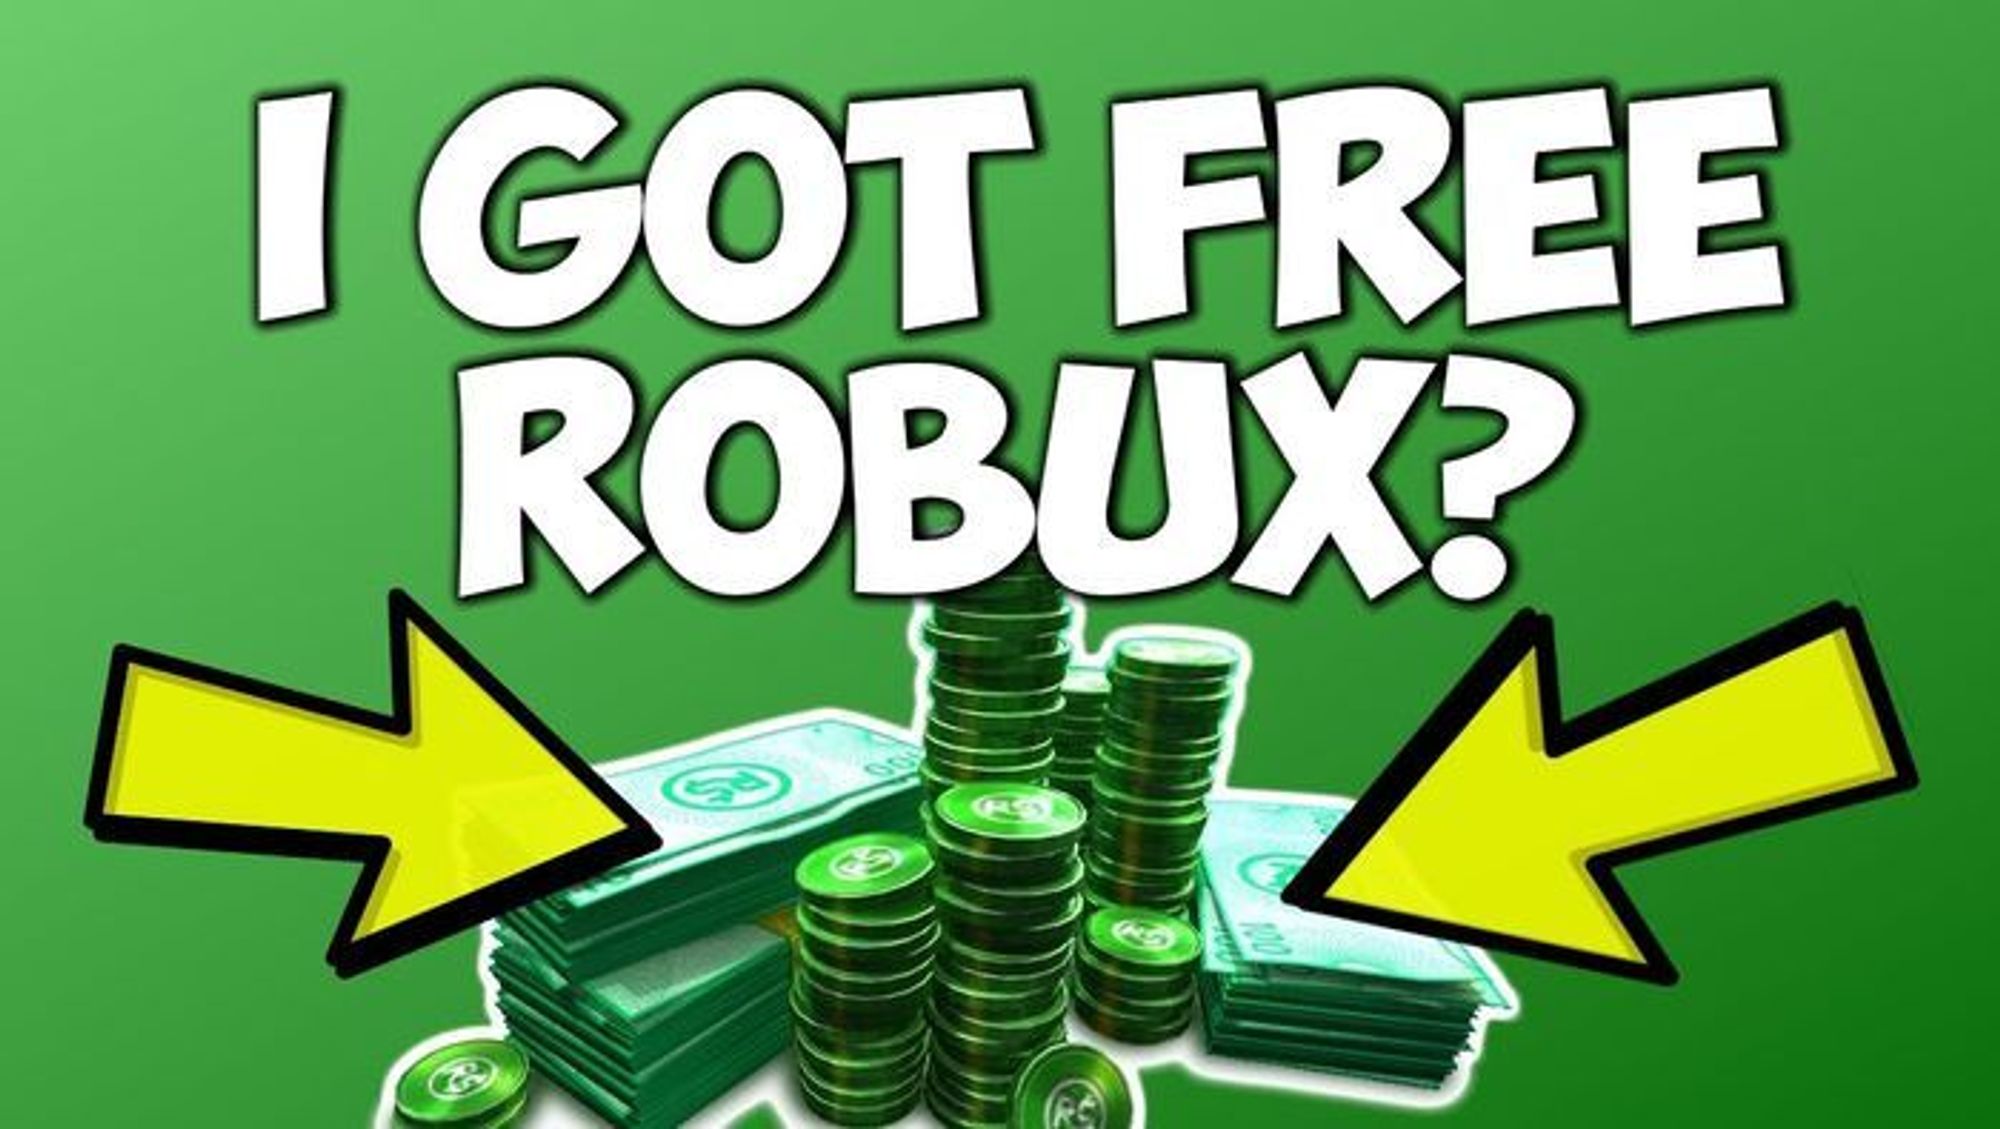 Robux Generator Free Roblox Robux Generator Is Too Good - how to get free robux no joke 2018 roblox robux exploit 2019